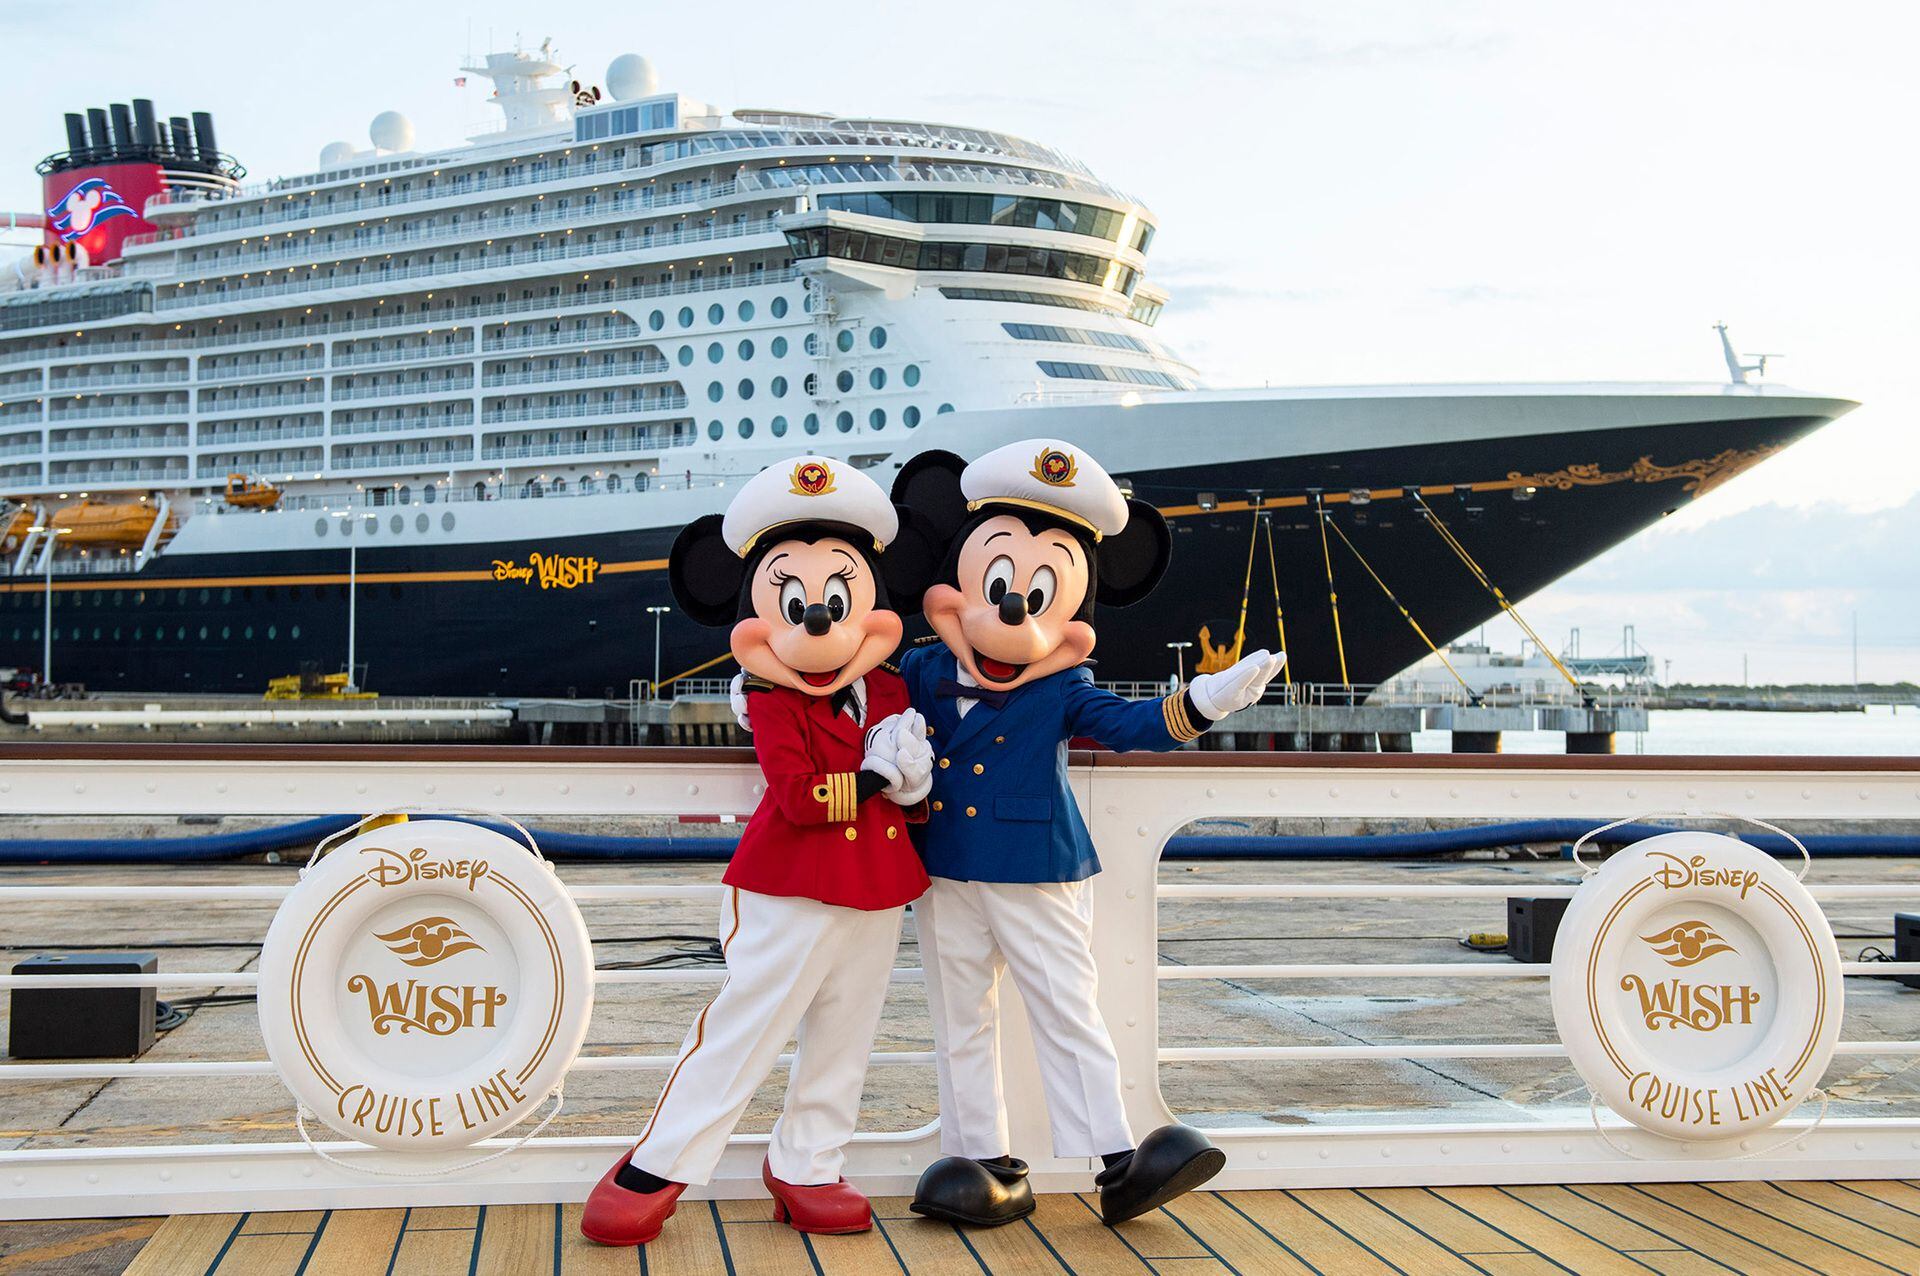 Cruise Holidays What It S Like On Board Disney Wish The Family Friendly New Ship Nz Herald